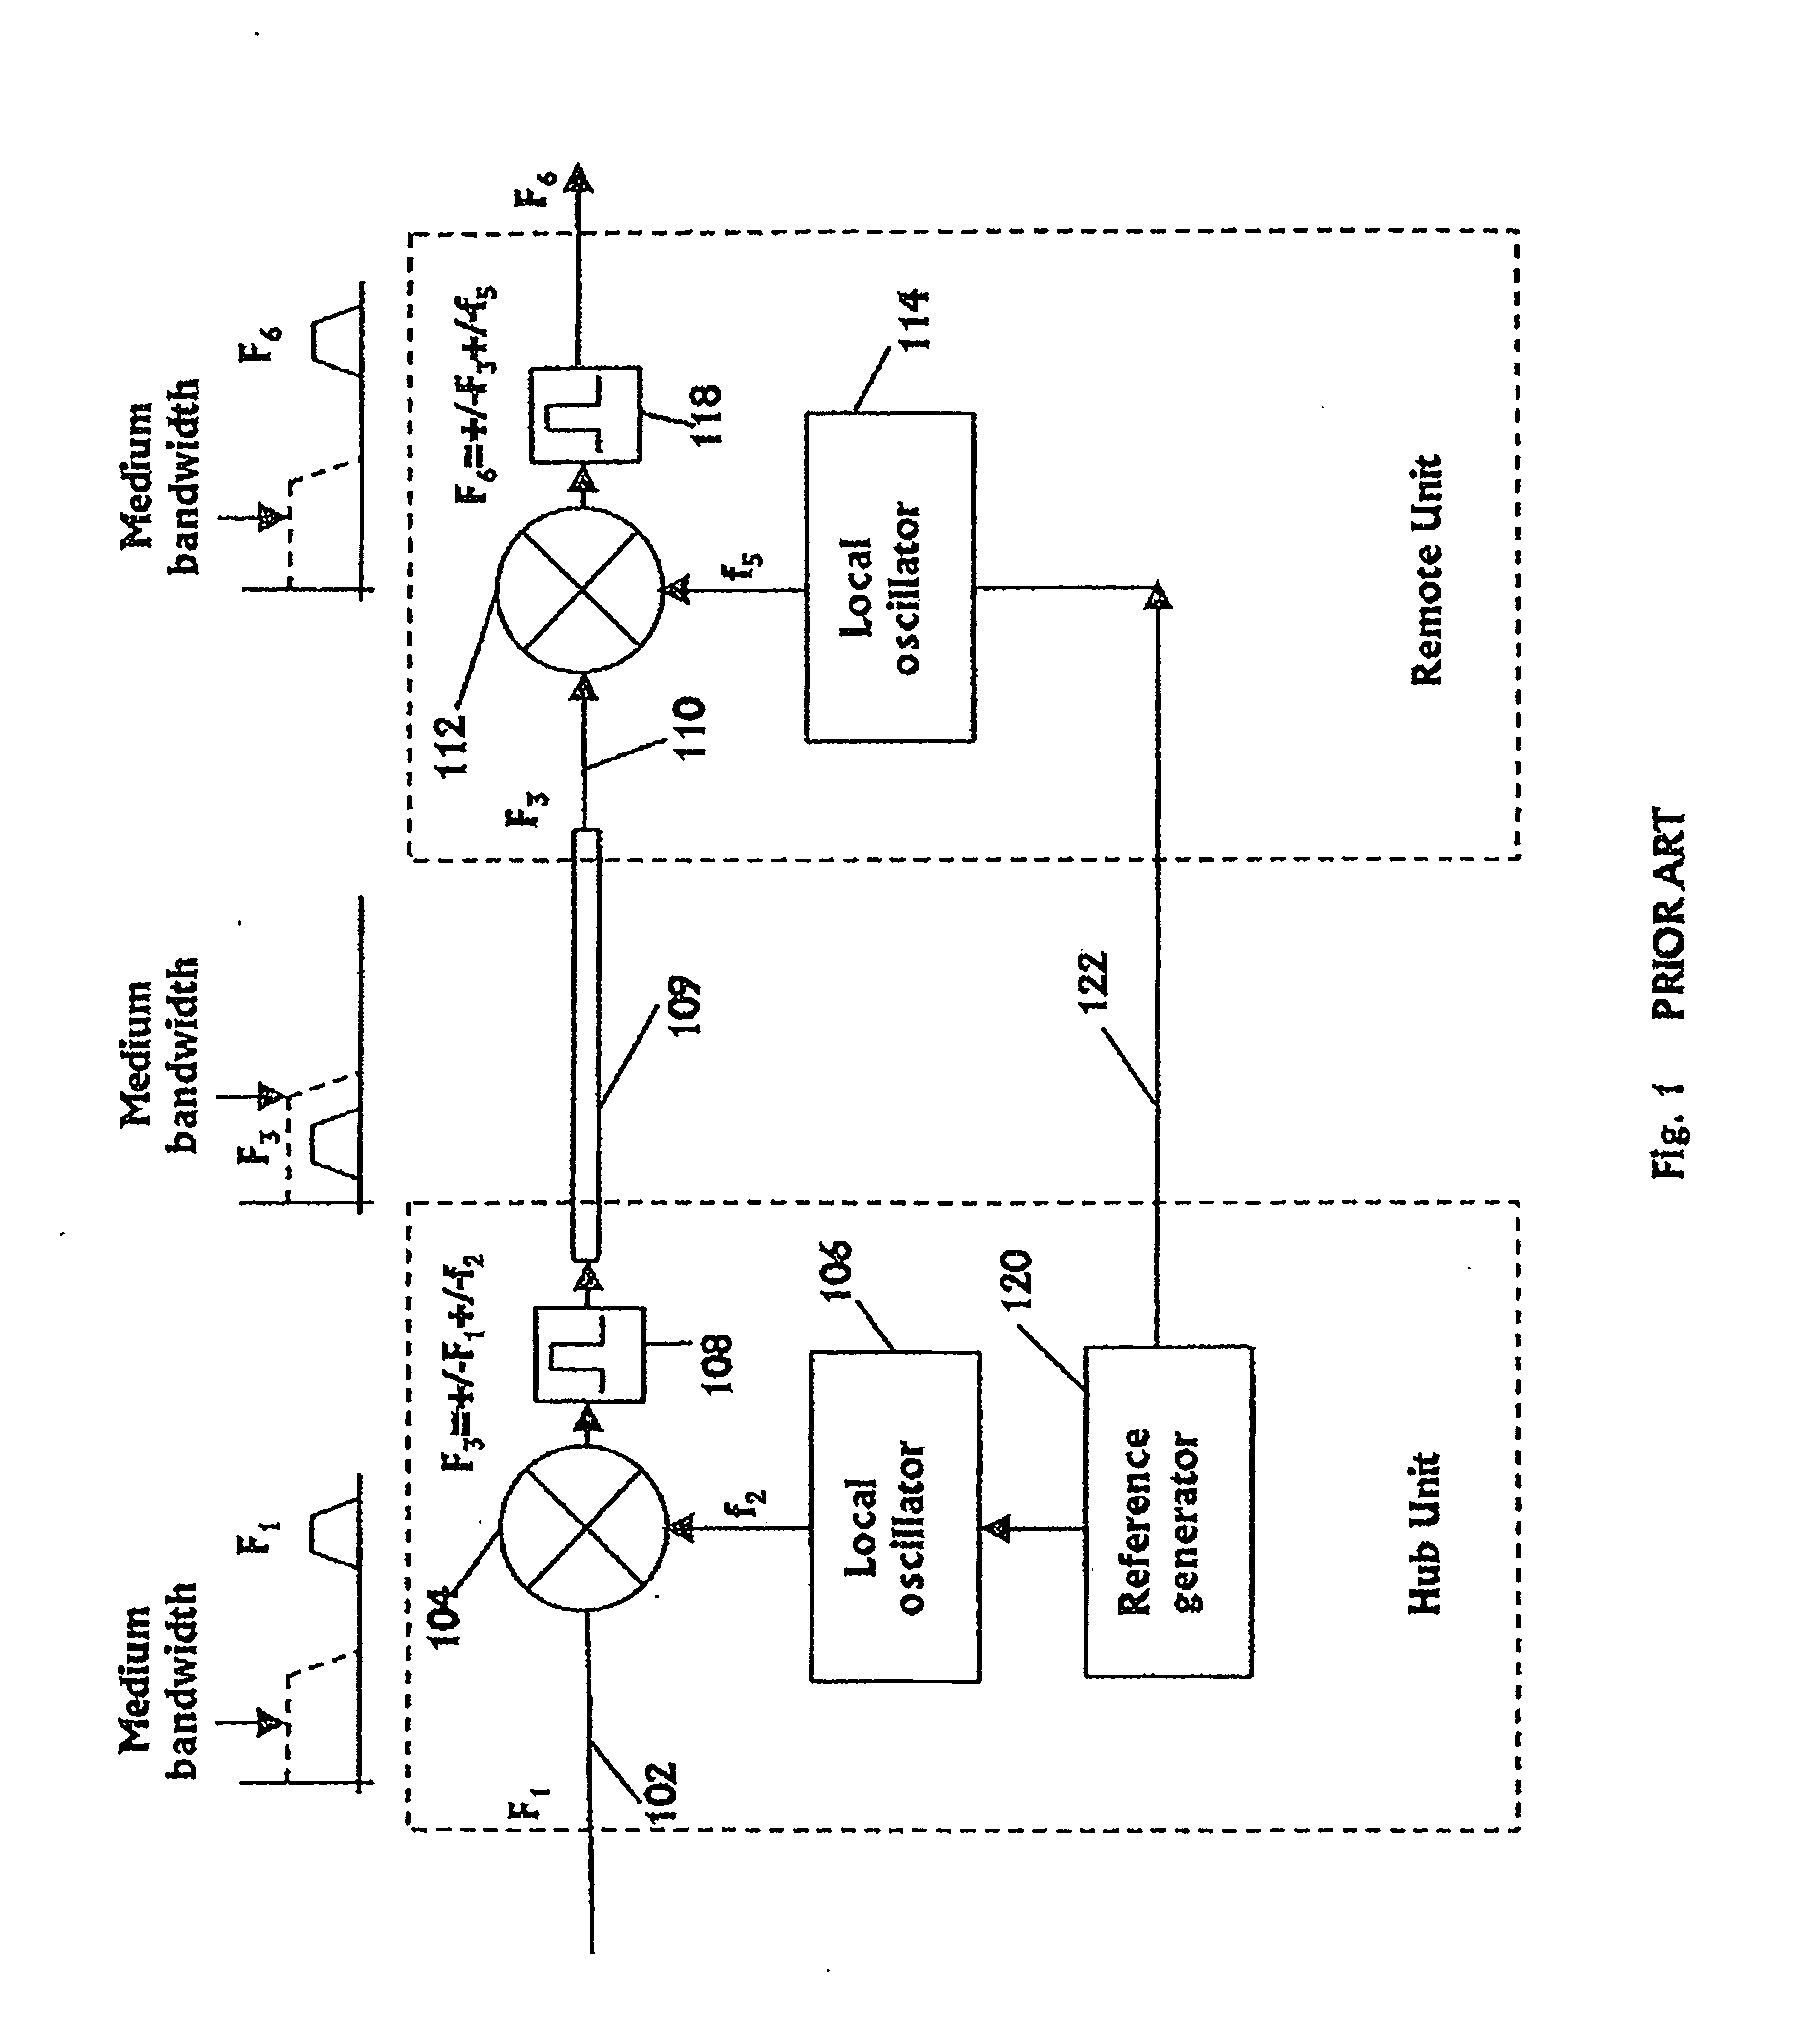 Communication system using cables carrying ethernet signals